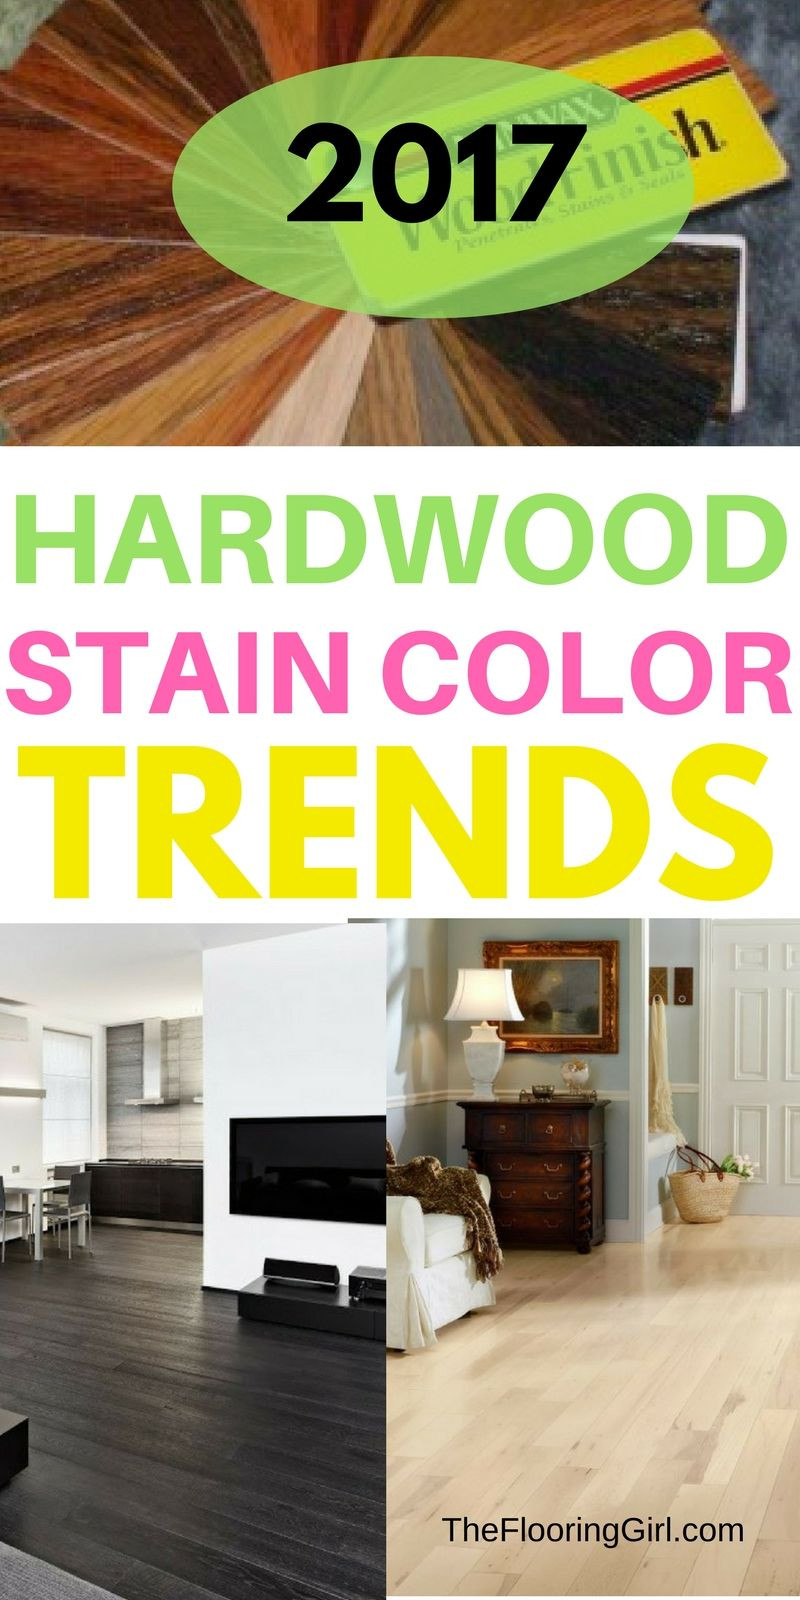 29 Unique Hardwood Floor Colors 2018 2024 free download hardwood floor colors 2018 of hardwood flooring stain color trends 2018 more from the flooring pertaining to hardwood flooring stain color trends for 2017 hardwood colors that are in style t